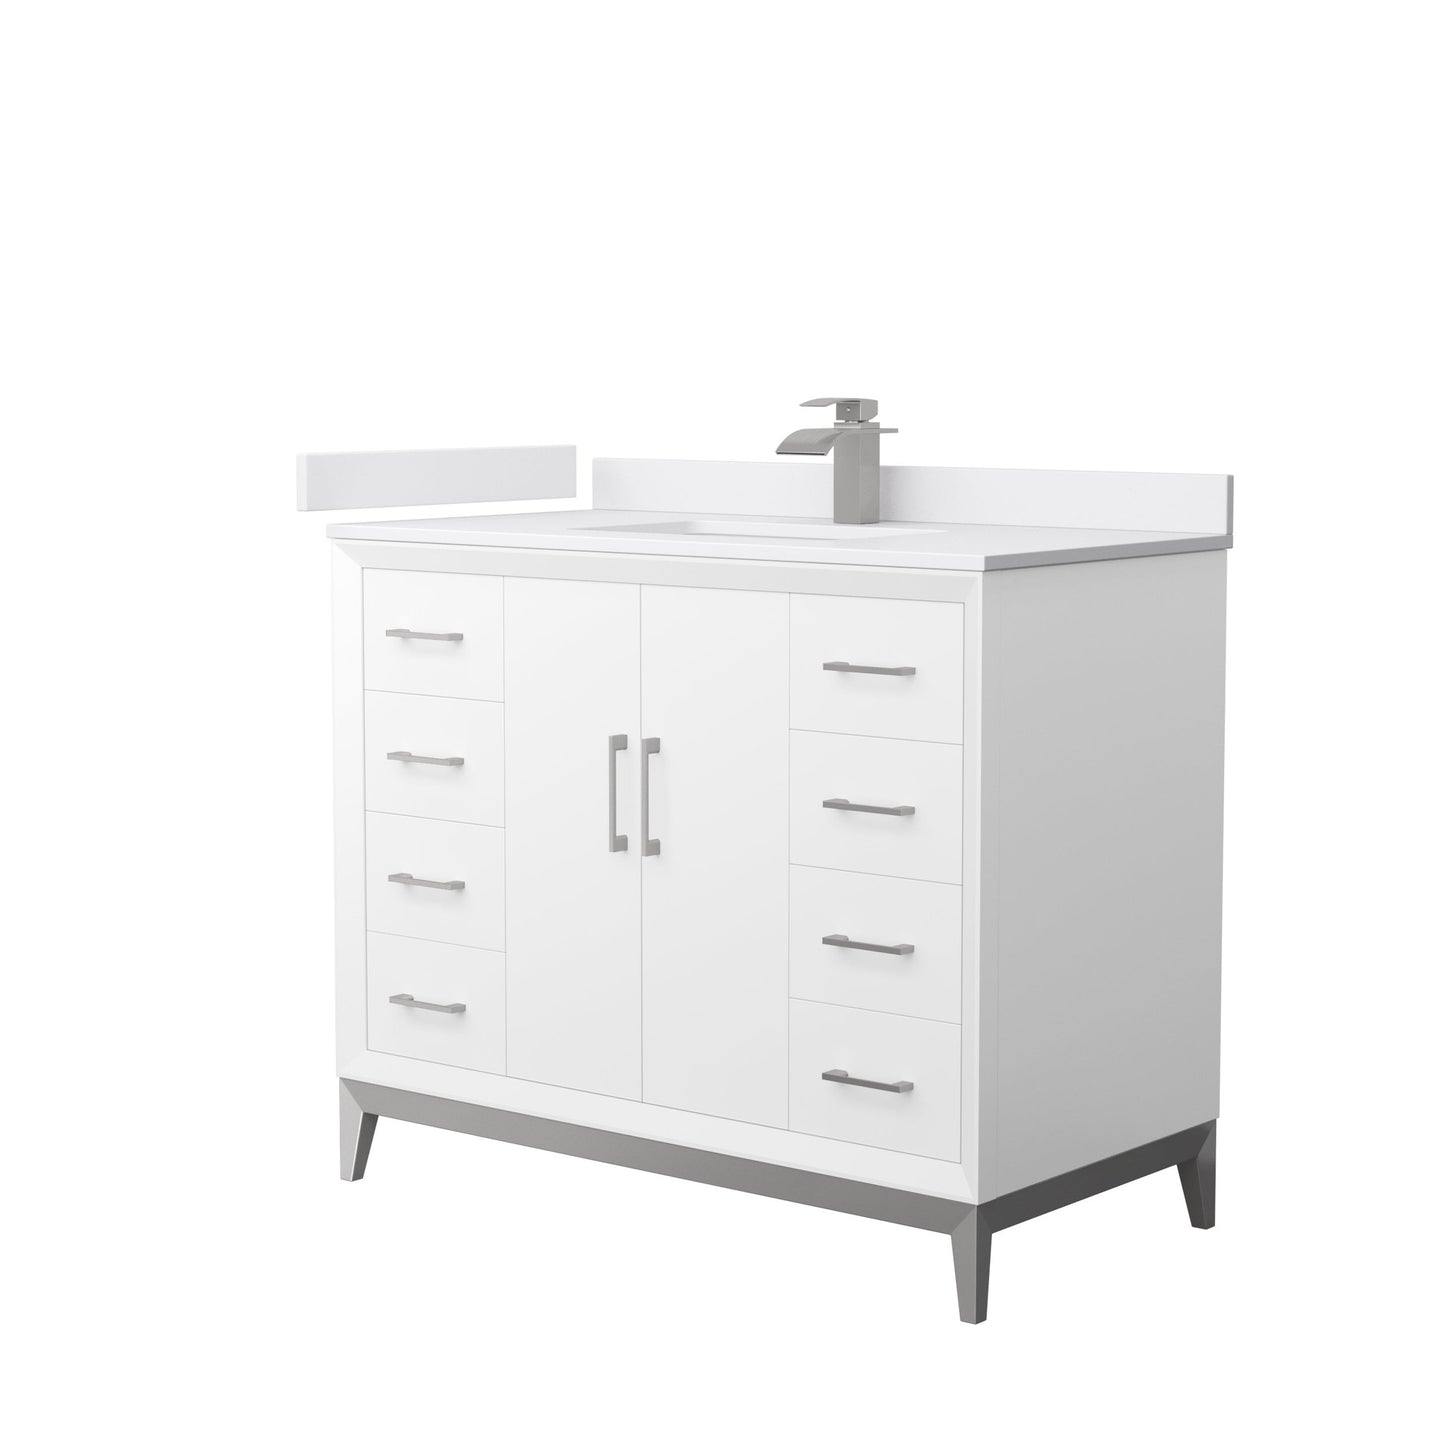 Wyndham Collection Amici 42" Single Bathroom Vanity in White, White Cultured Marble Countertop, Undermount Square Sink, Brushed Nickel Trim